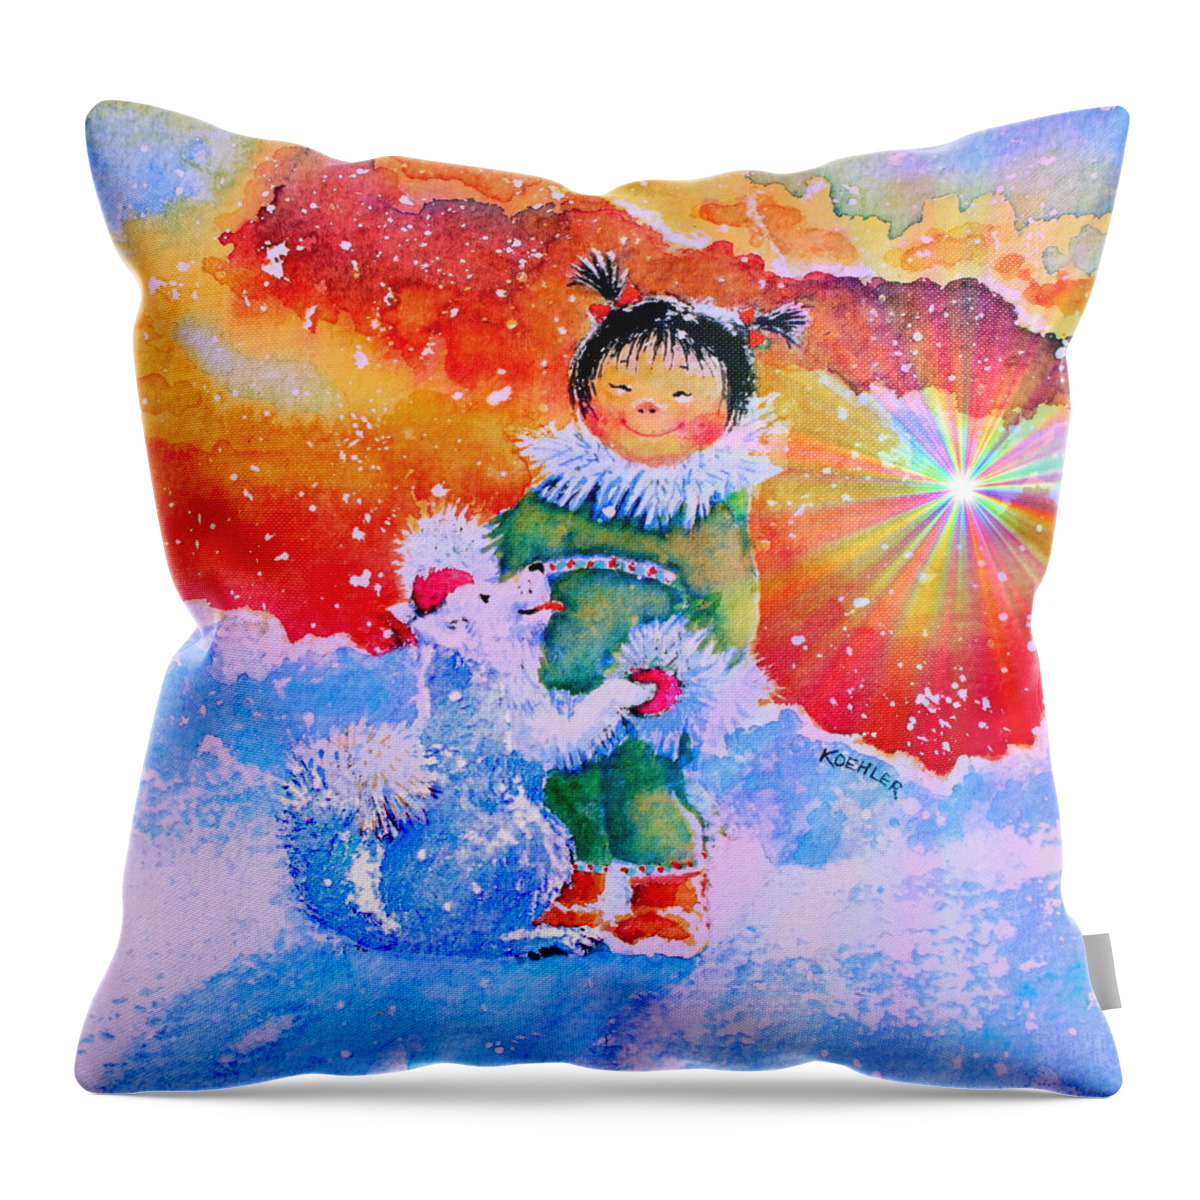 Bedroom Throw Pillow featuring the painting Pigtails And Wagging Tail by Hanne Lore Koehler